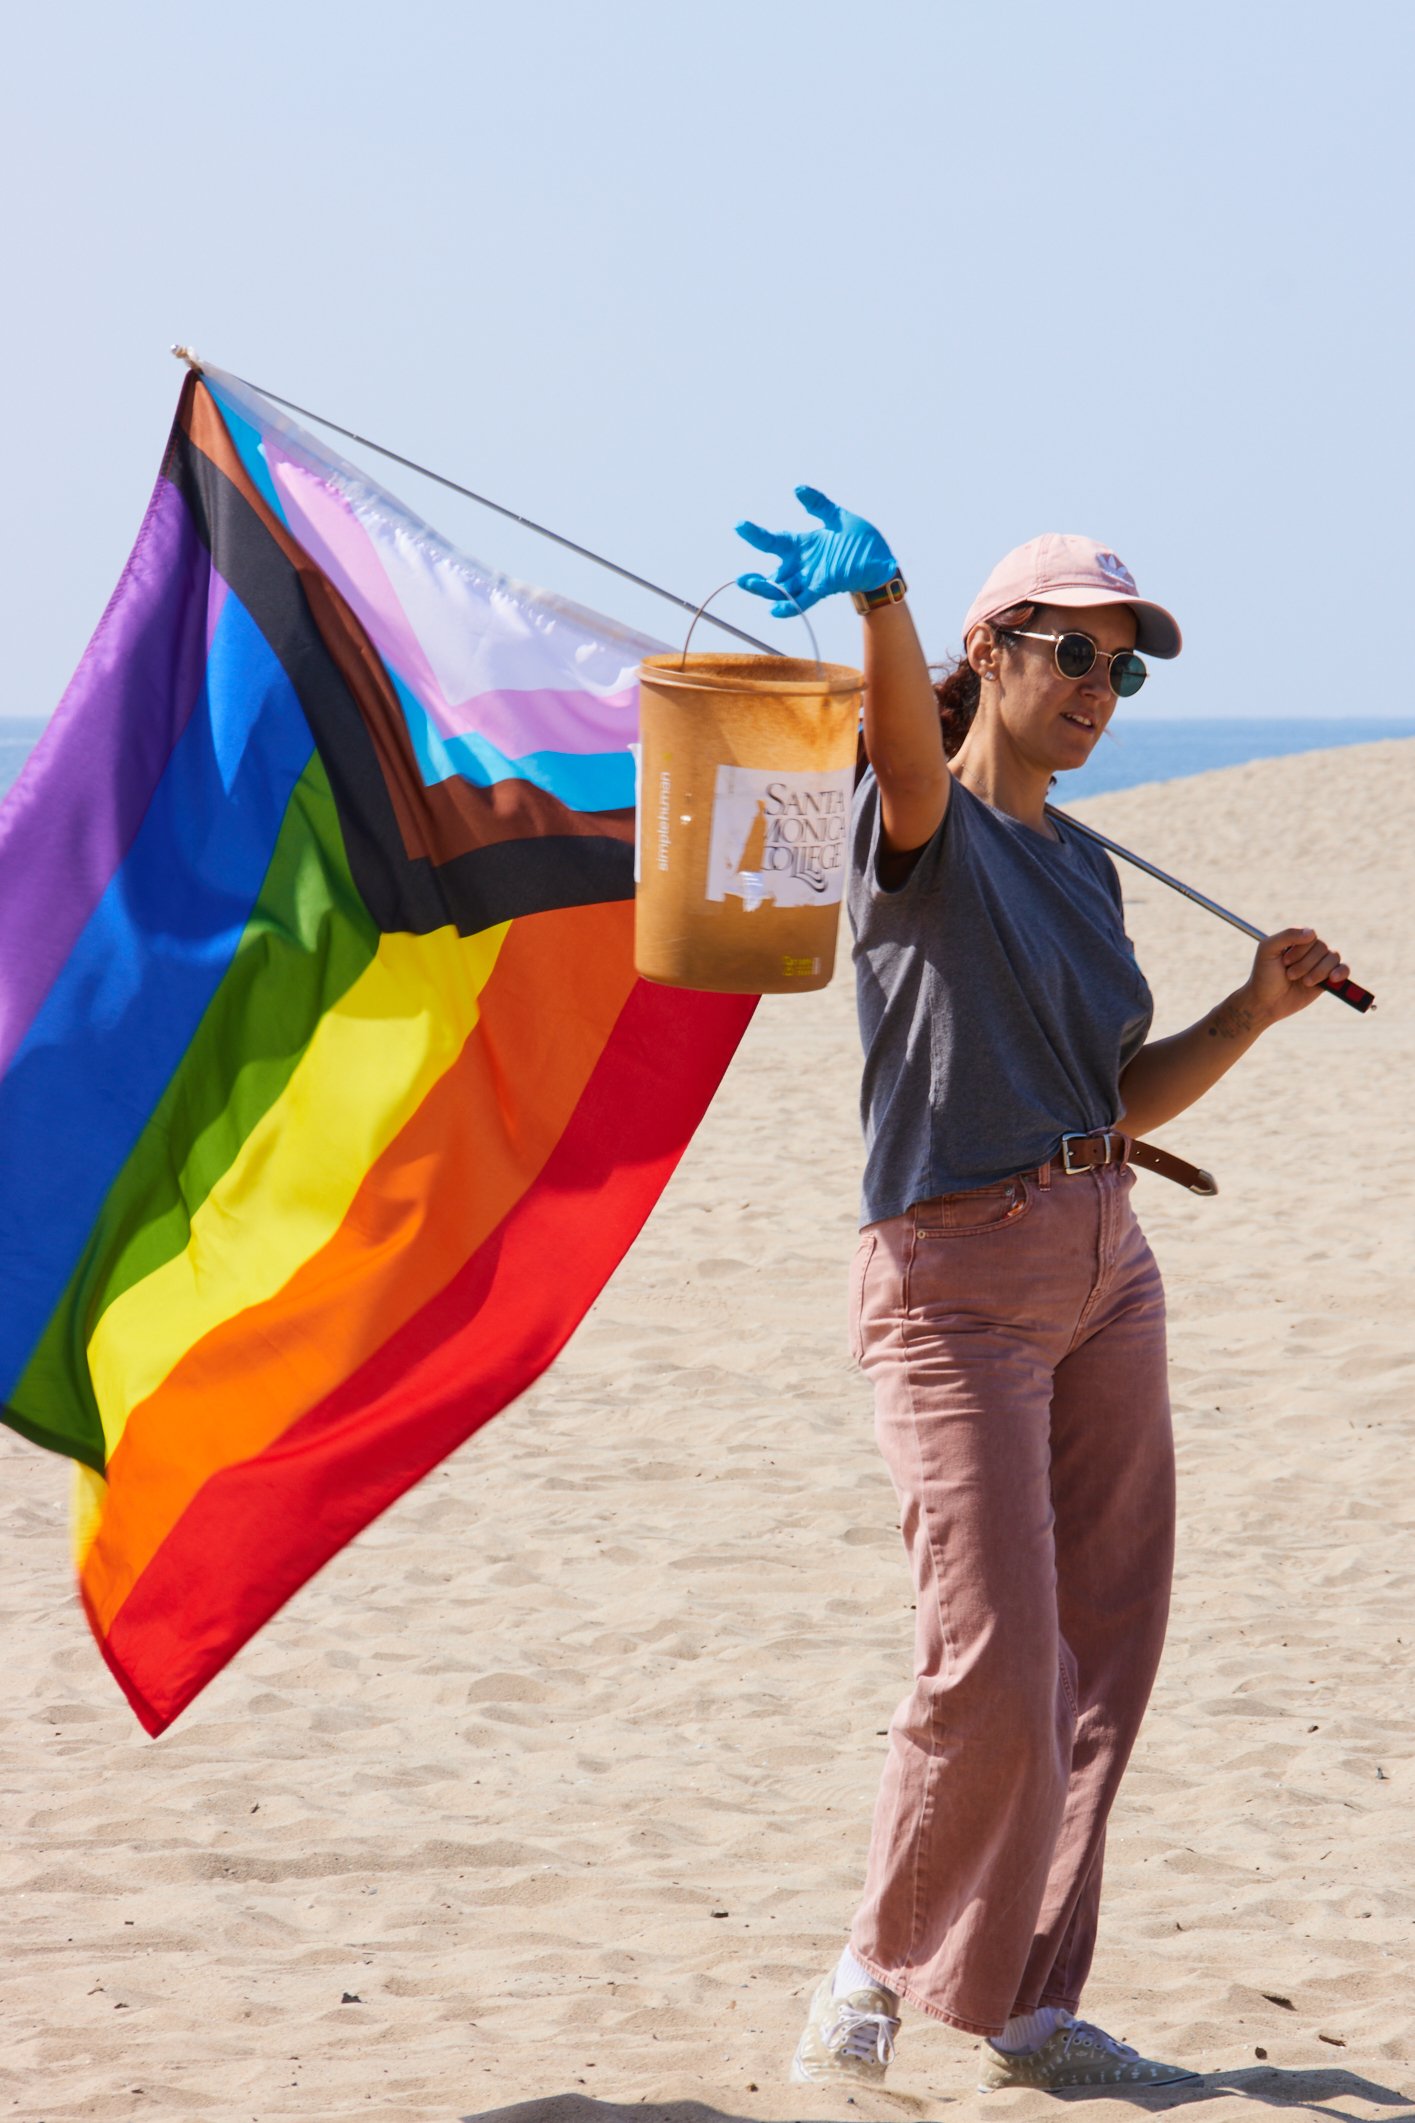  Volunteers Elif Sekman raises her bucket filled with collected trash while holding a pride flag on the other hand during a coastal beach cleanup organized by Santa Monica College Sustainability Center at The Inkwell, Santa Monica, Calif., on Sept 23